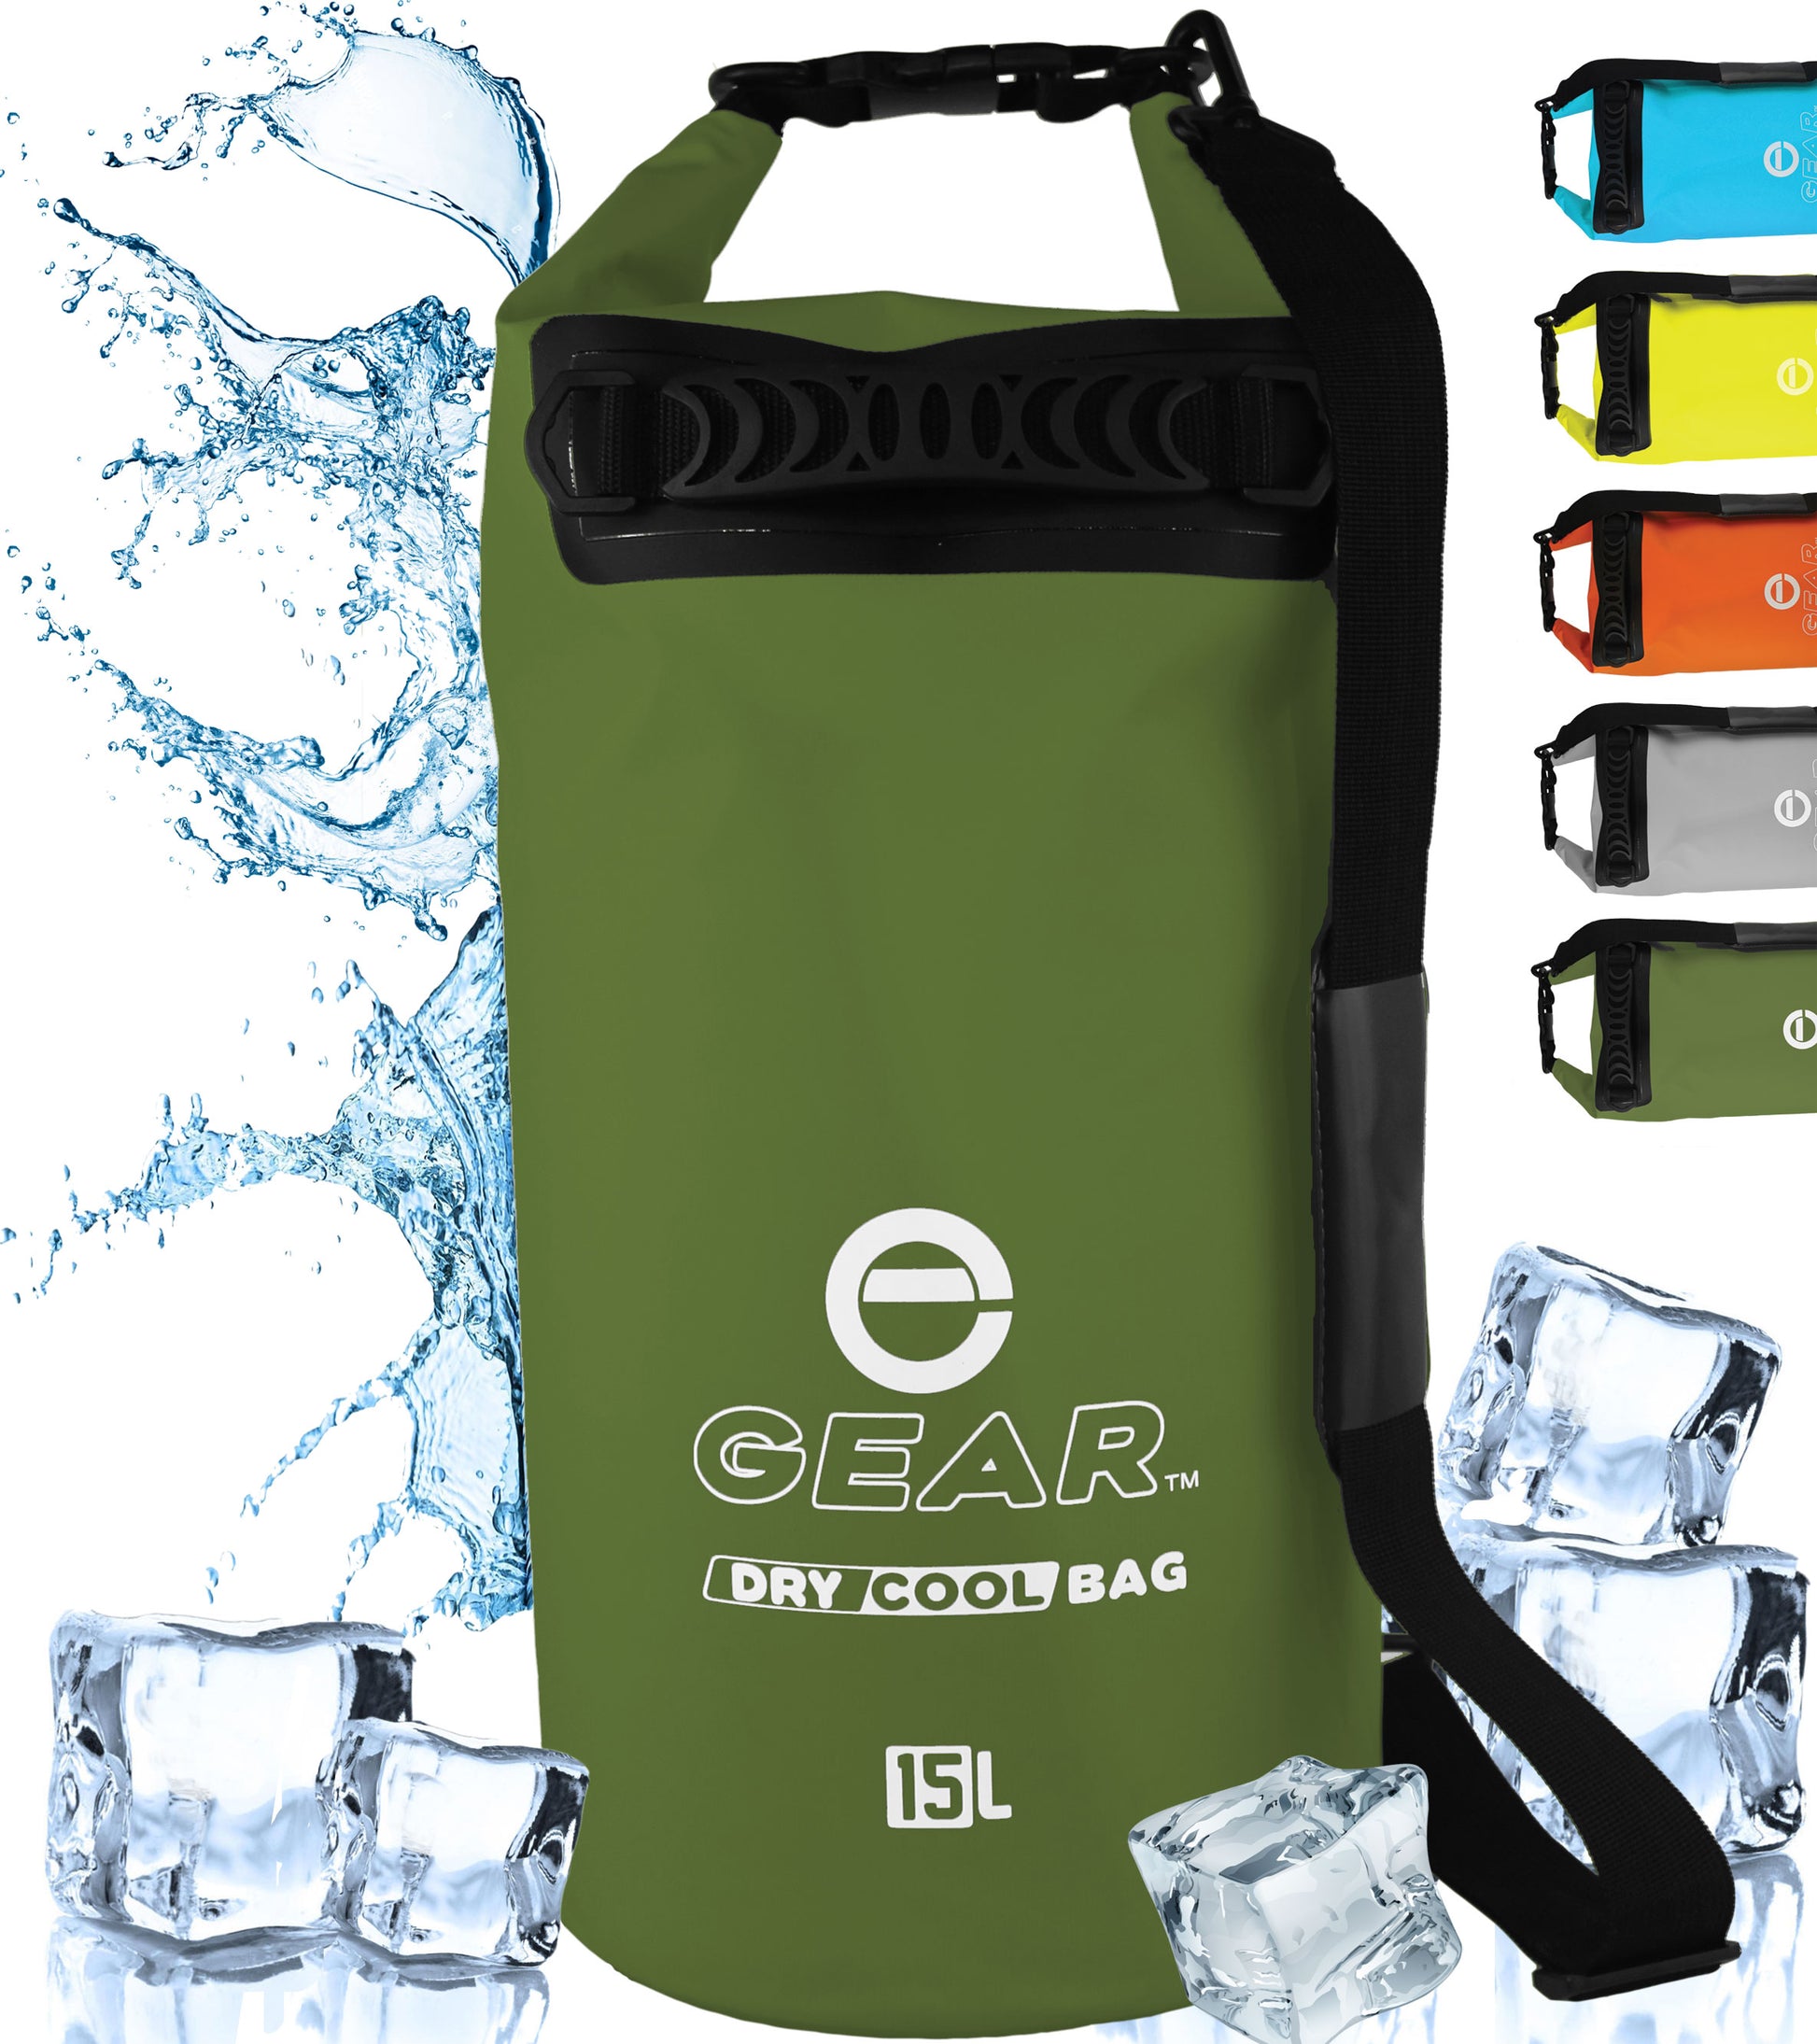 15L - Enthusiast Gear Dry Bag Cooler – Perfect for Kayaking - 15L